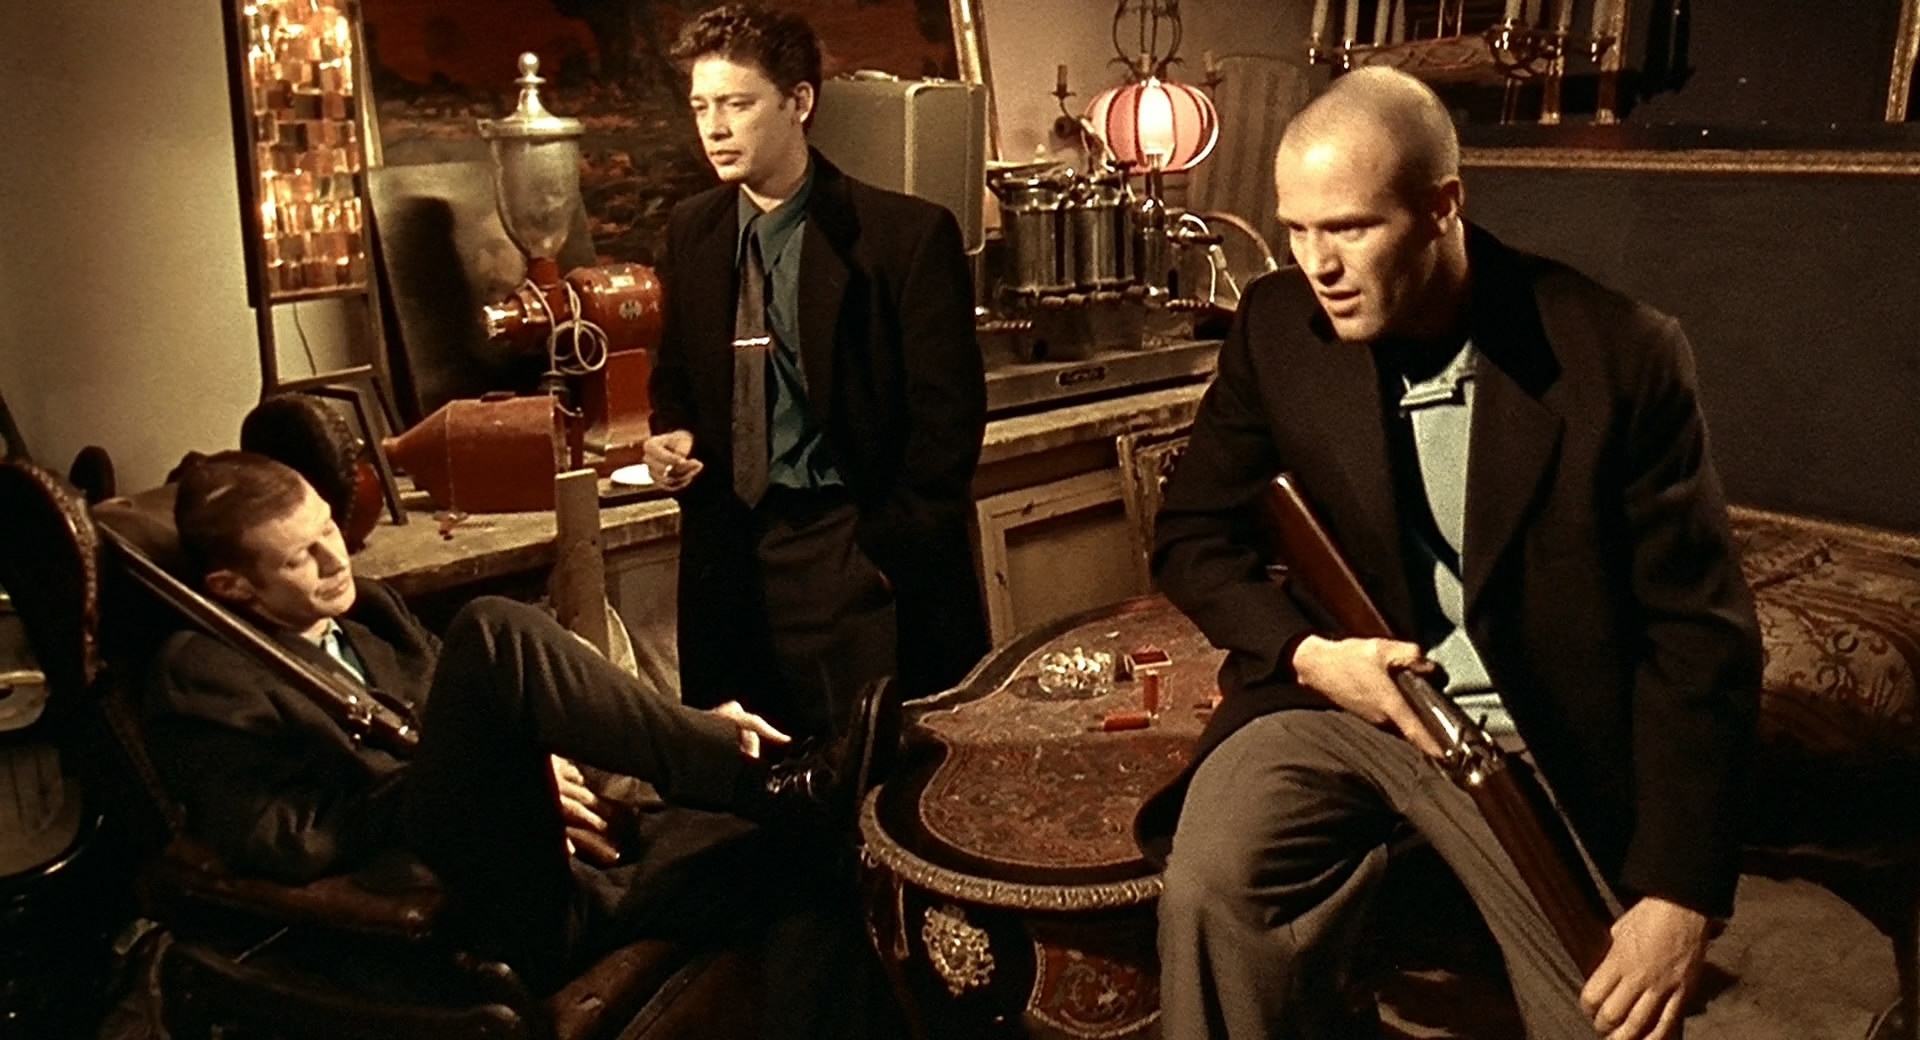 12 Facts About 'Lock, Stock and Two Smoking Barrels'